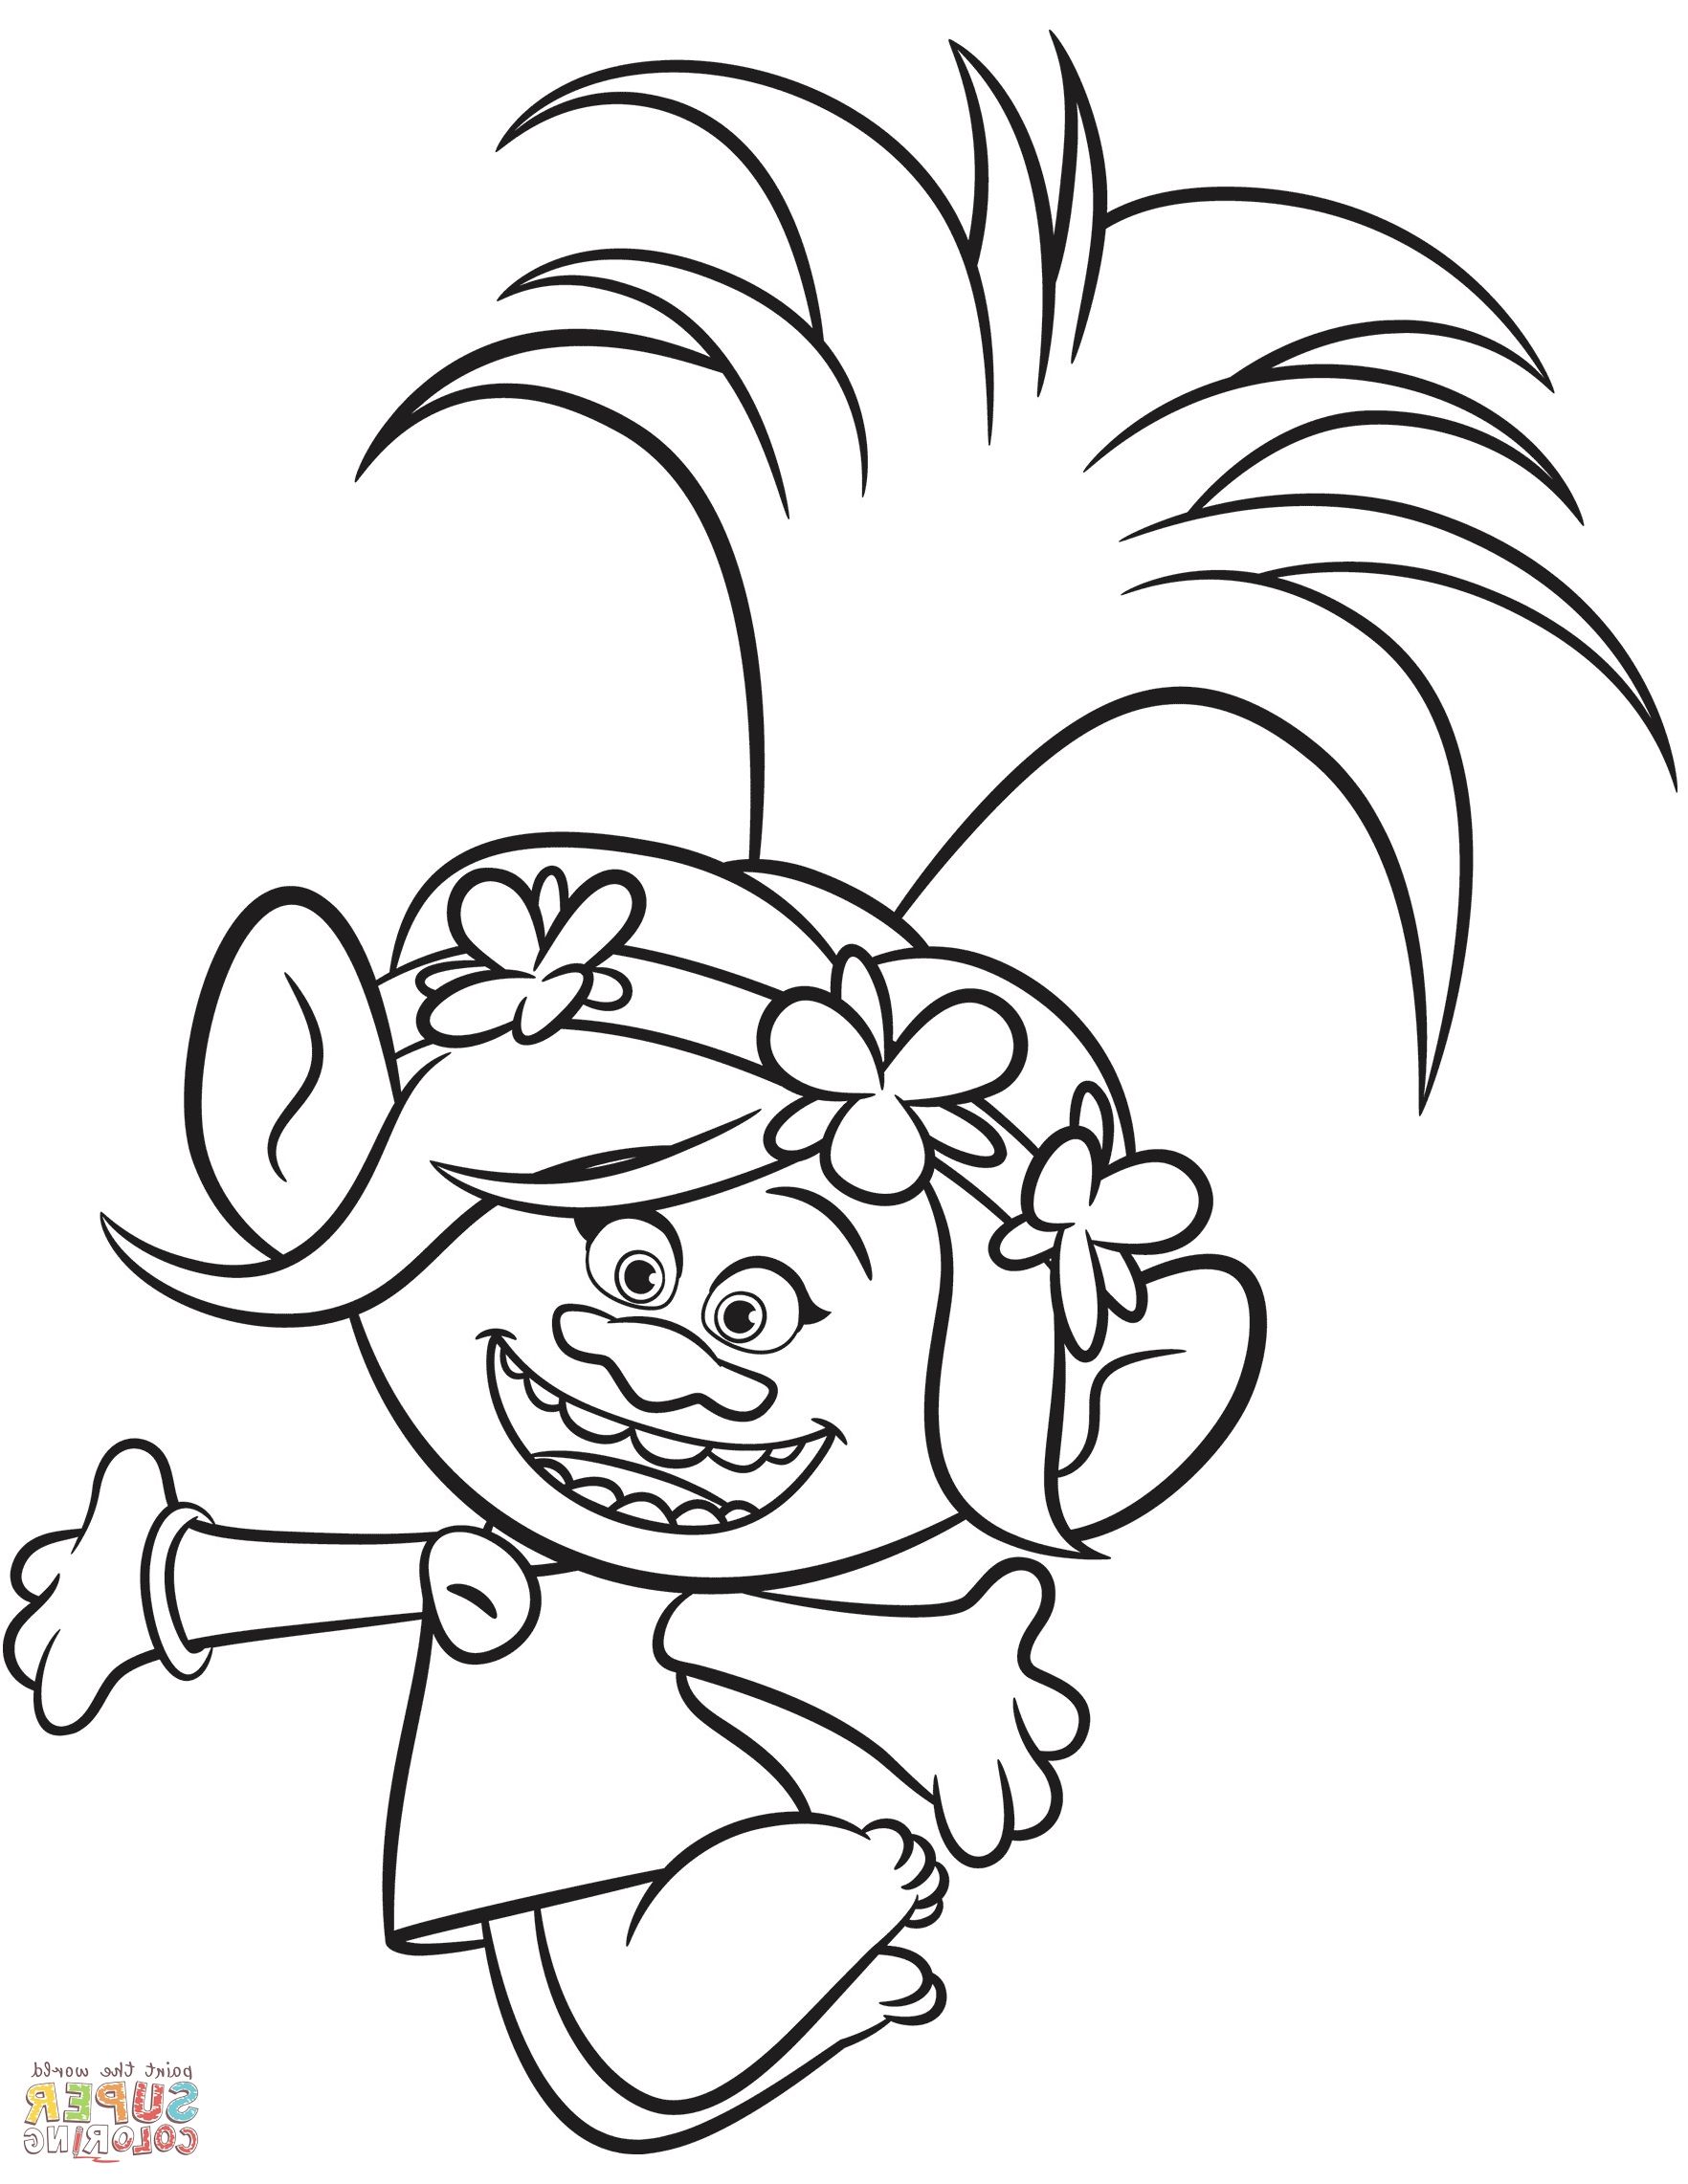 Poppy Coloring Page at GetColorings.com   Free printable colorings ...